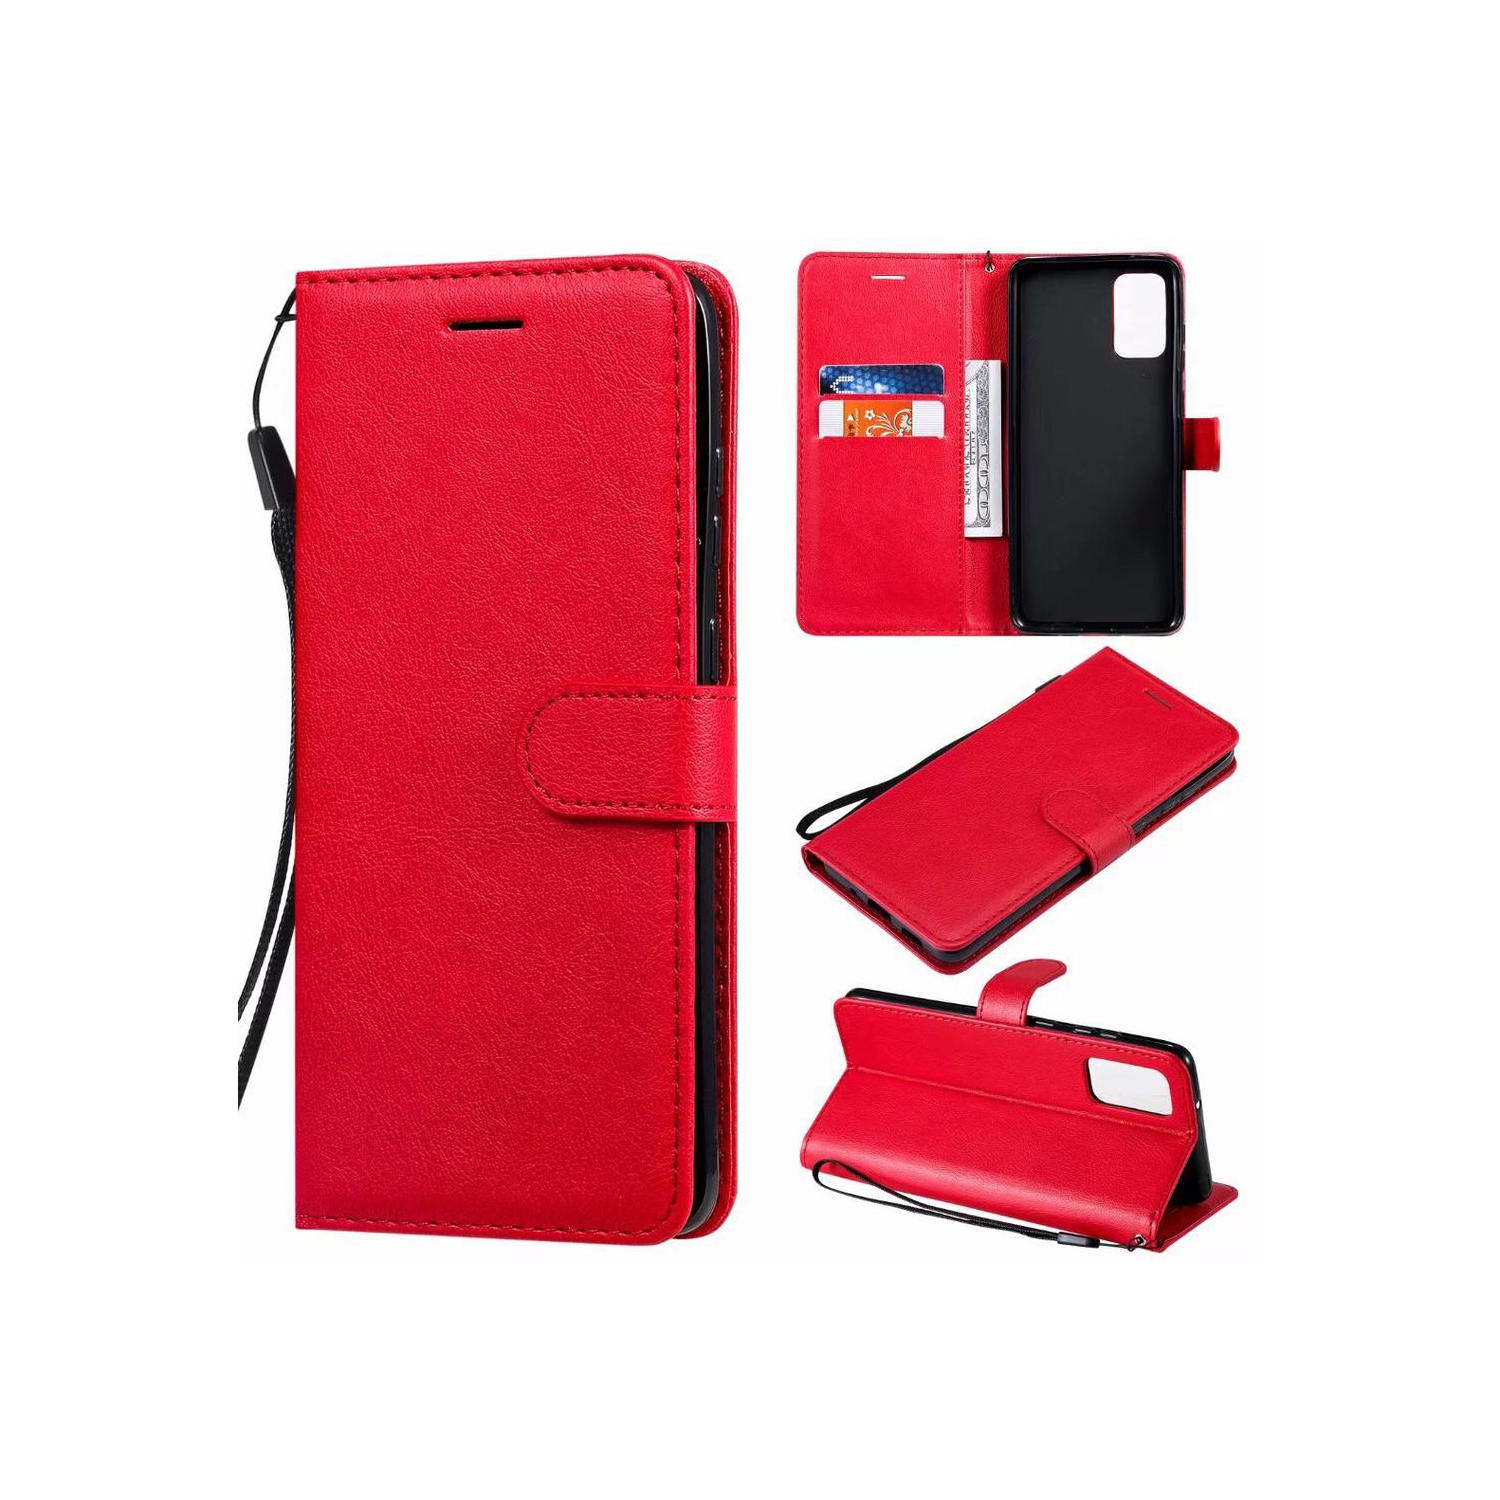 [CS] Samsung Galaxy A32 5G Case, Magnetic Leather Folio Wallet Flip Case Cover with Card Slot, Red